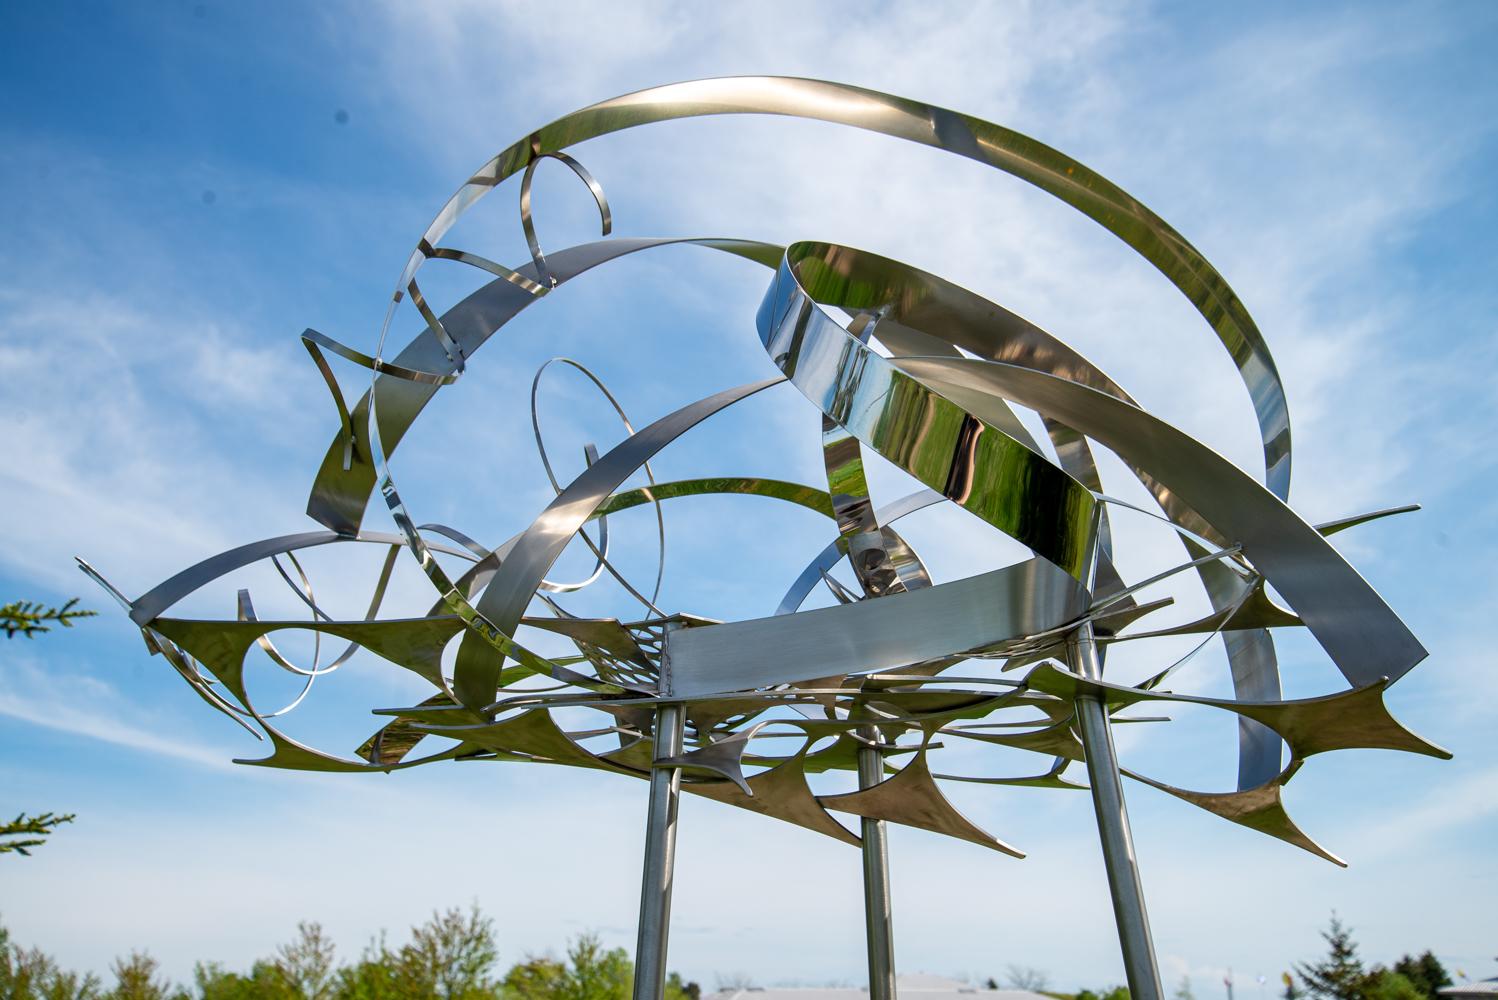 Ania Biczysko Abstract Sculpture - Cumulus VI Revisited - large, tall, cloud, outdoor stainless steel sculpture